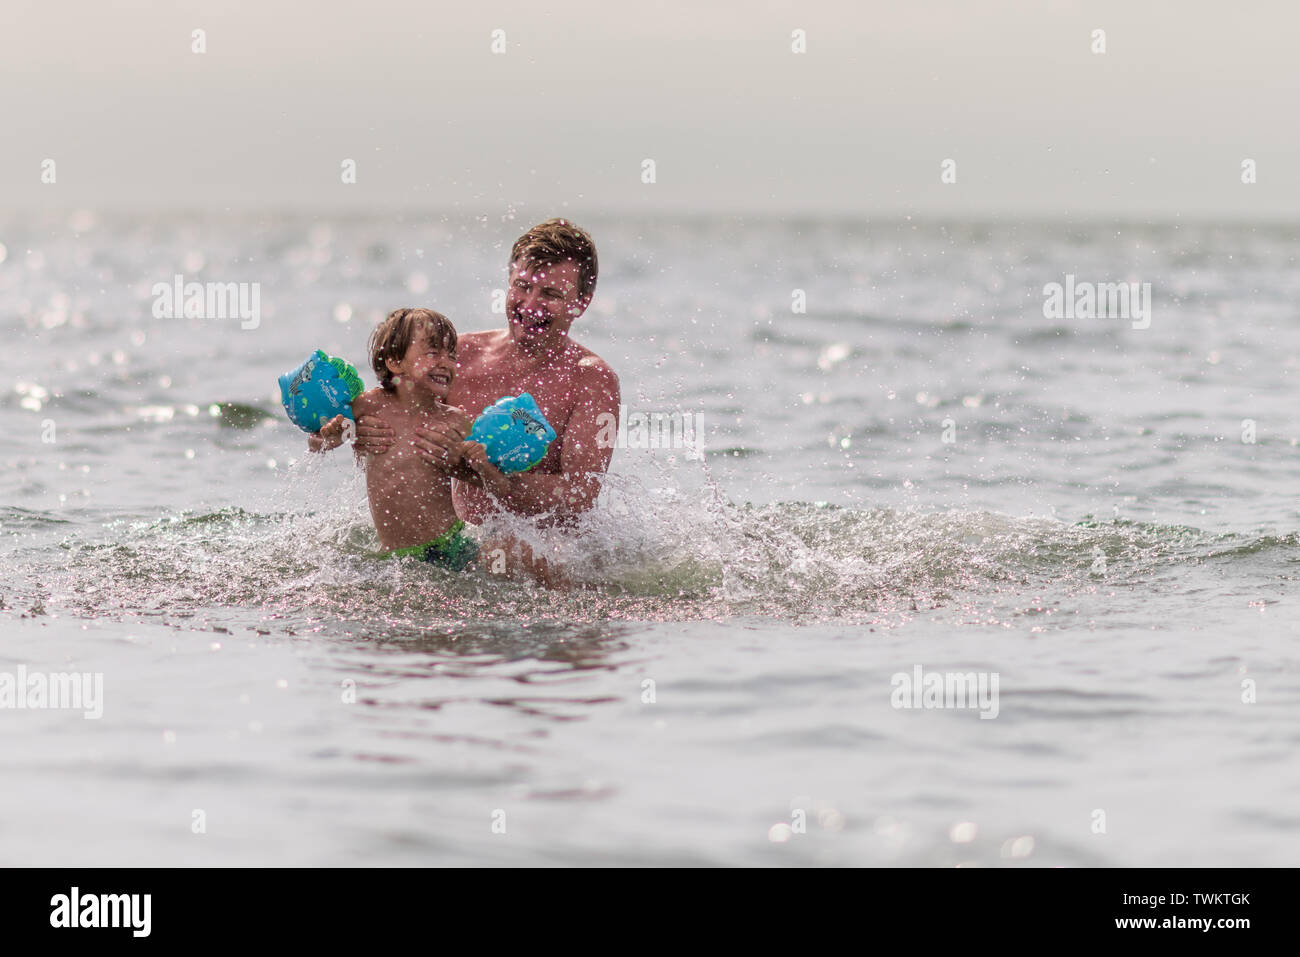 Among the water droplets, in the sea, in the sun, happy with all that life offers to them, spending quality time together, the two men in the photo ar Stock Photo